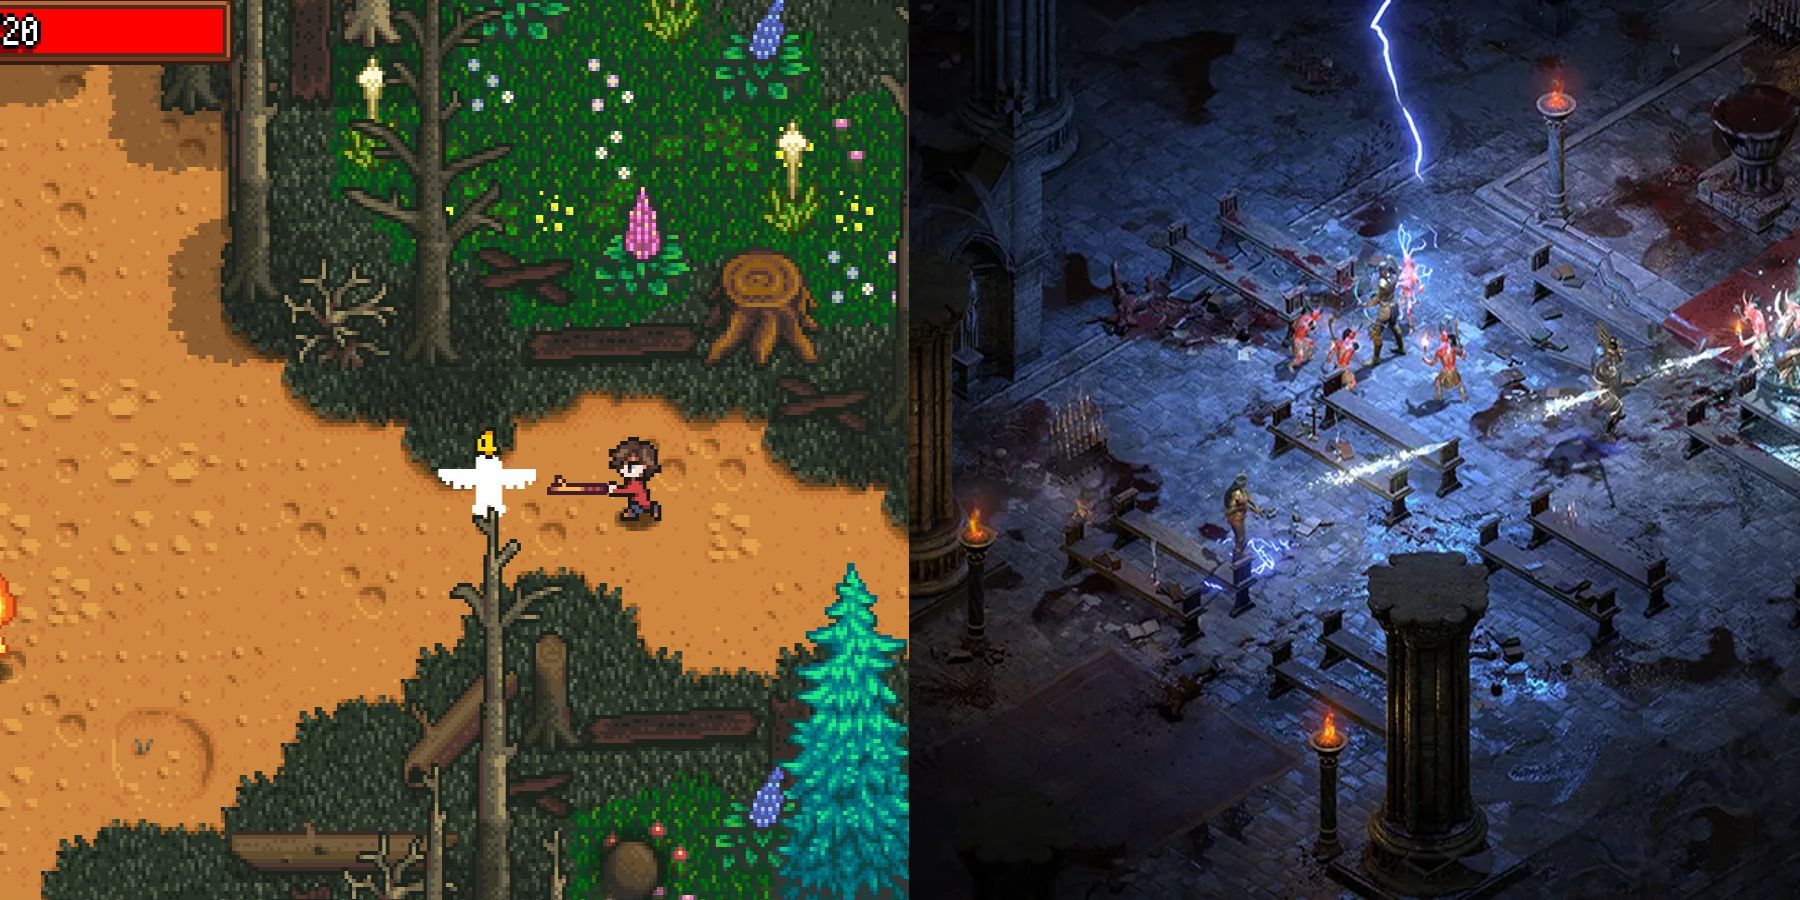 One image showing Diablo 2 combat and the other image showing combat in Haunted Chocolatier